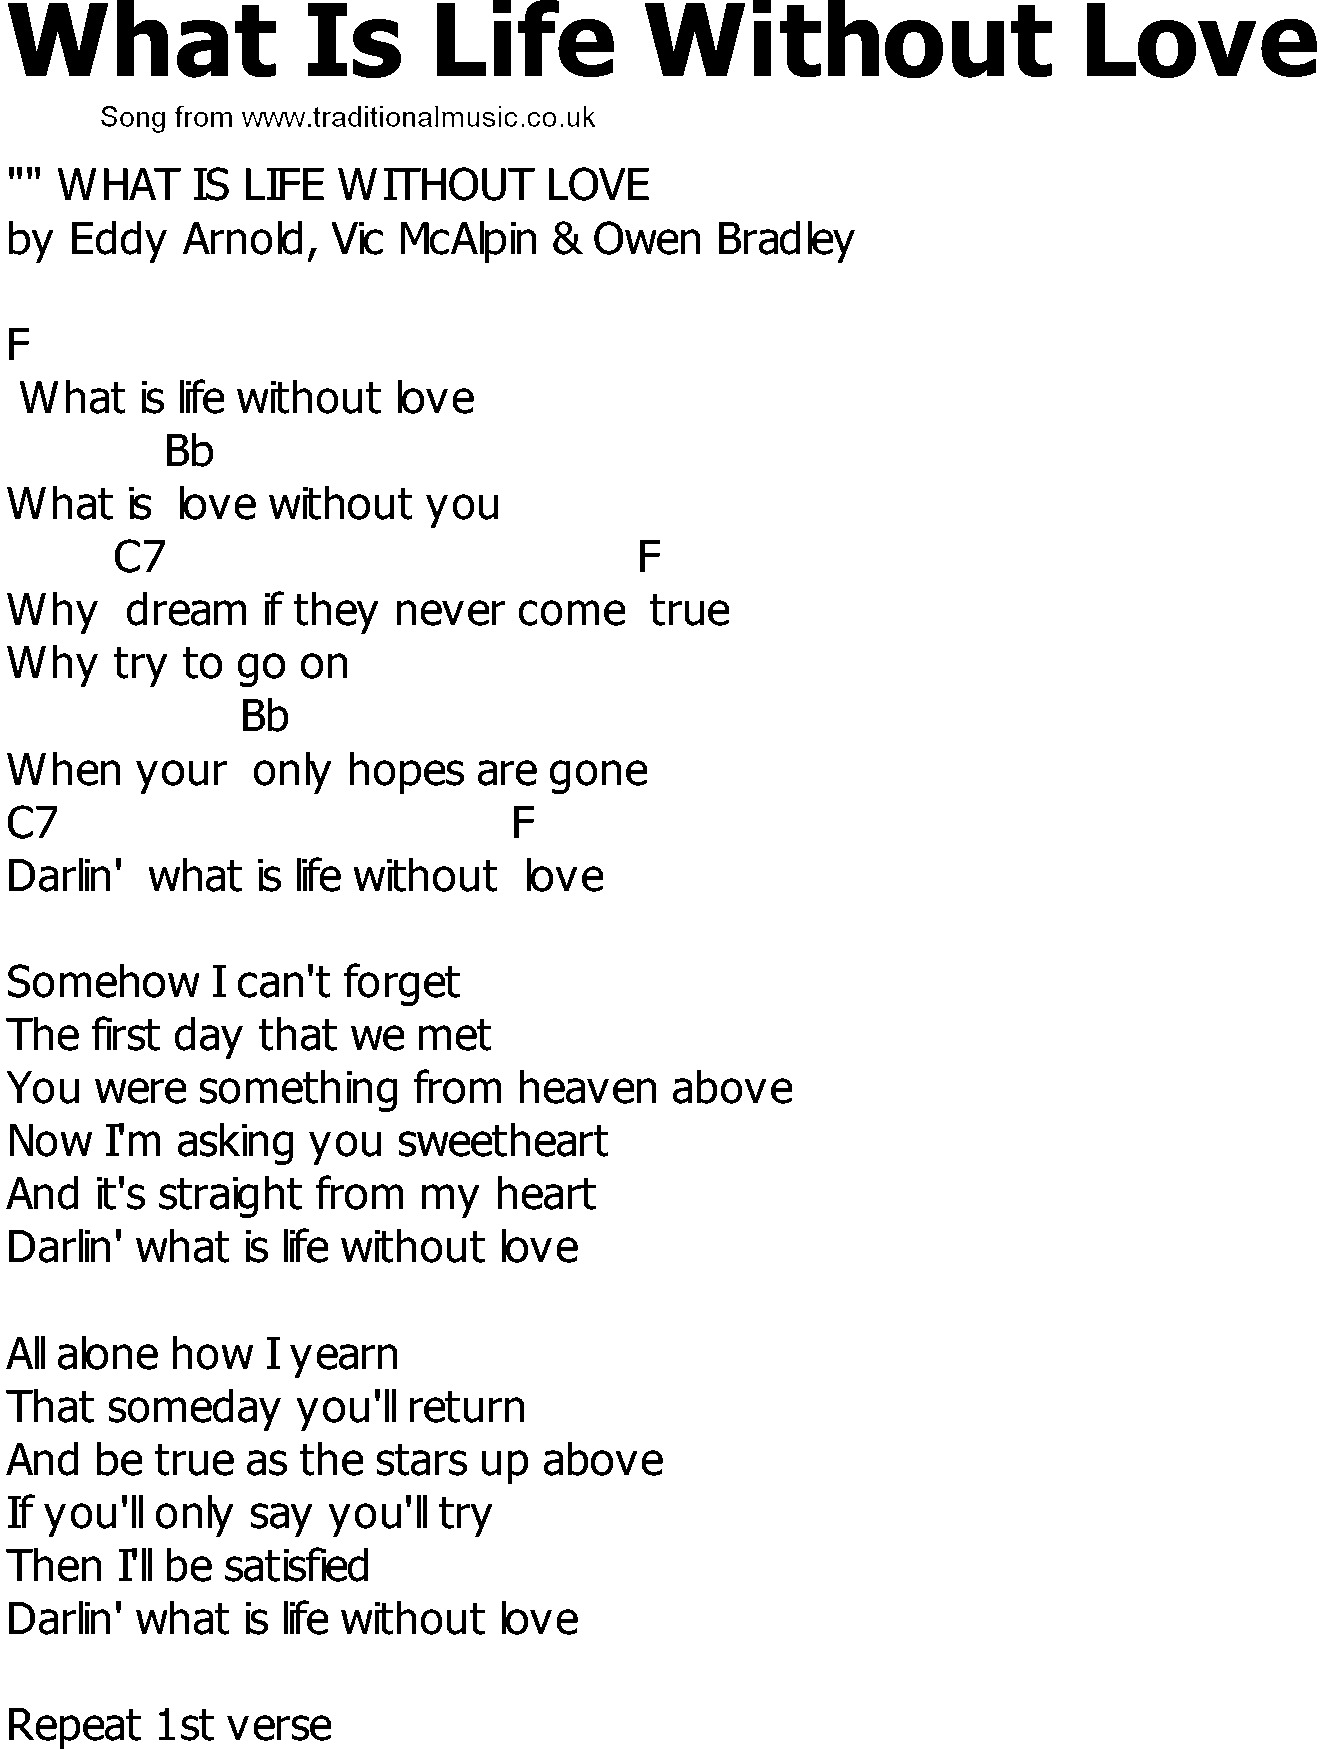 Old Country song lyrics with chords - What Is Life Without Love